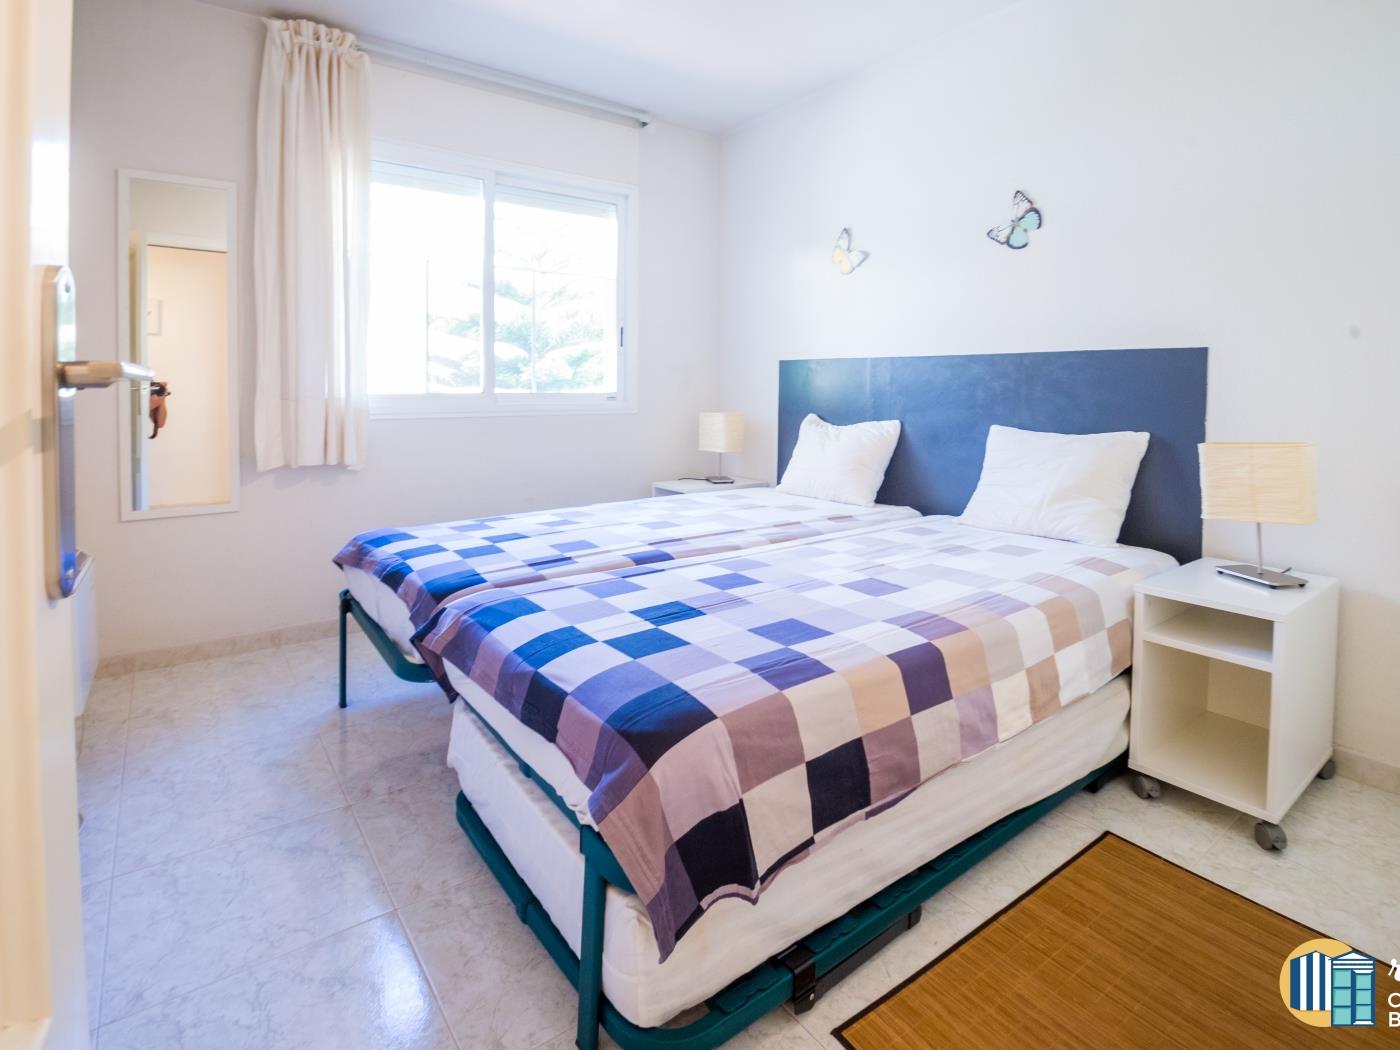 Apartament Sant Pol located in S'agaró 5 minutes from the beach with parking. in S'Agaró